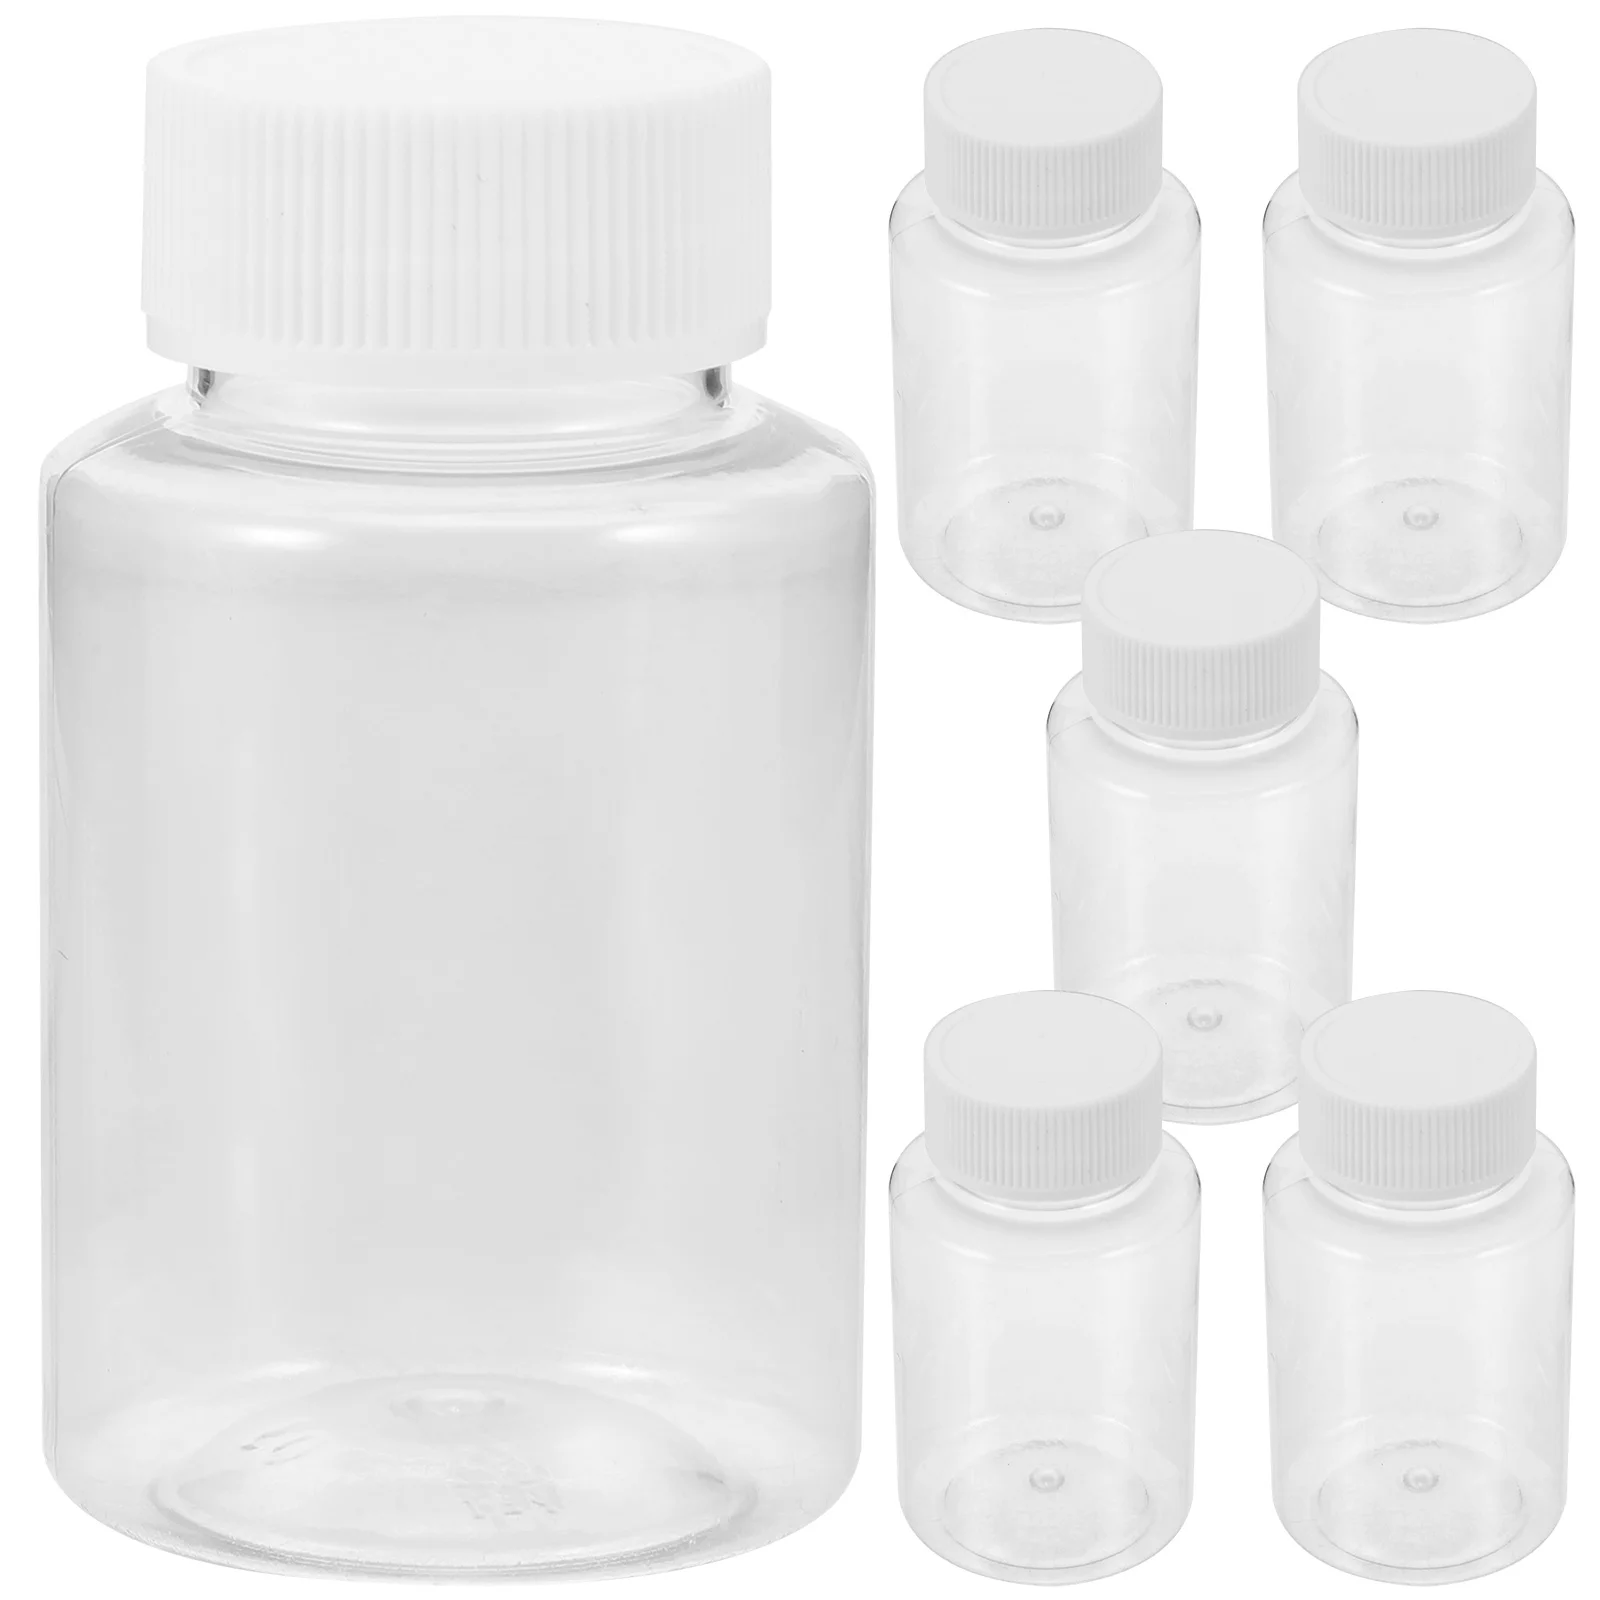 

6 Pcs Reagent Bottle For Laboratory Reagent Empty Reagent Storage Bottle Sealing Vial for Lab with Caps Laboratory Sampling